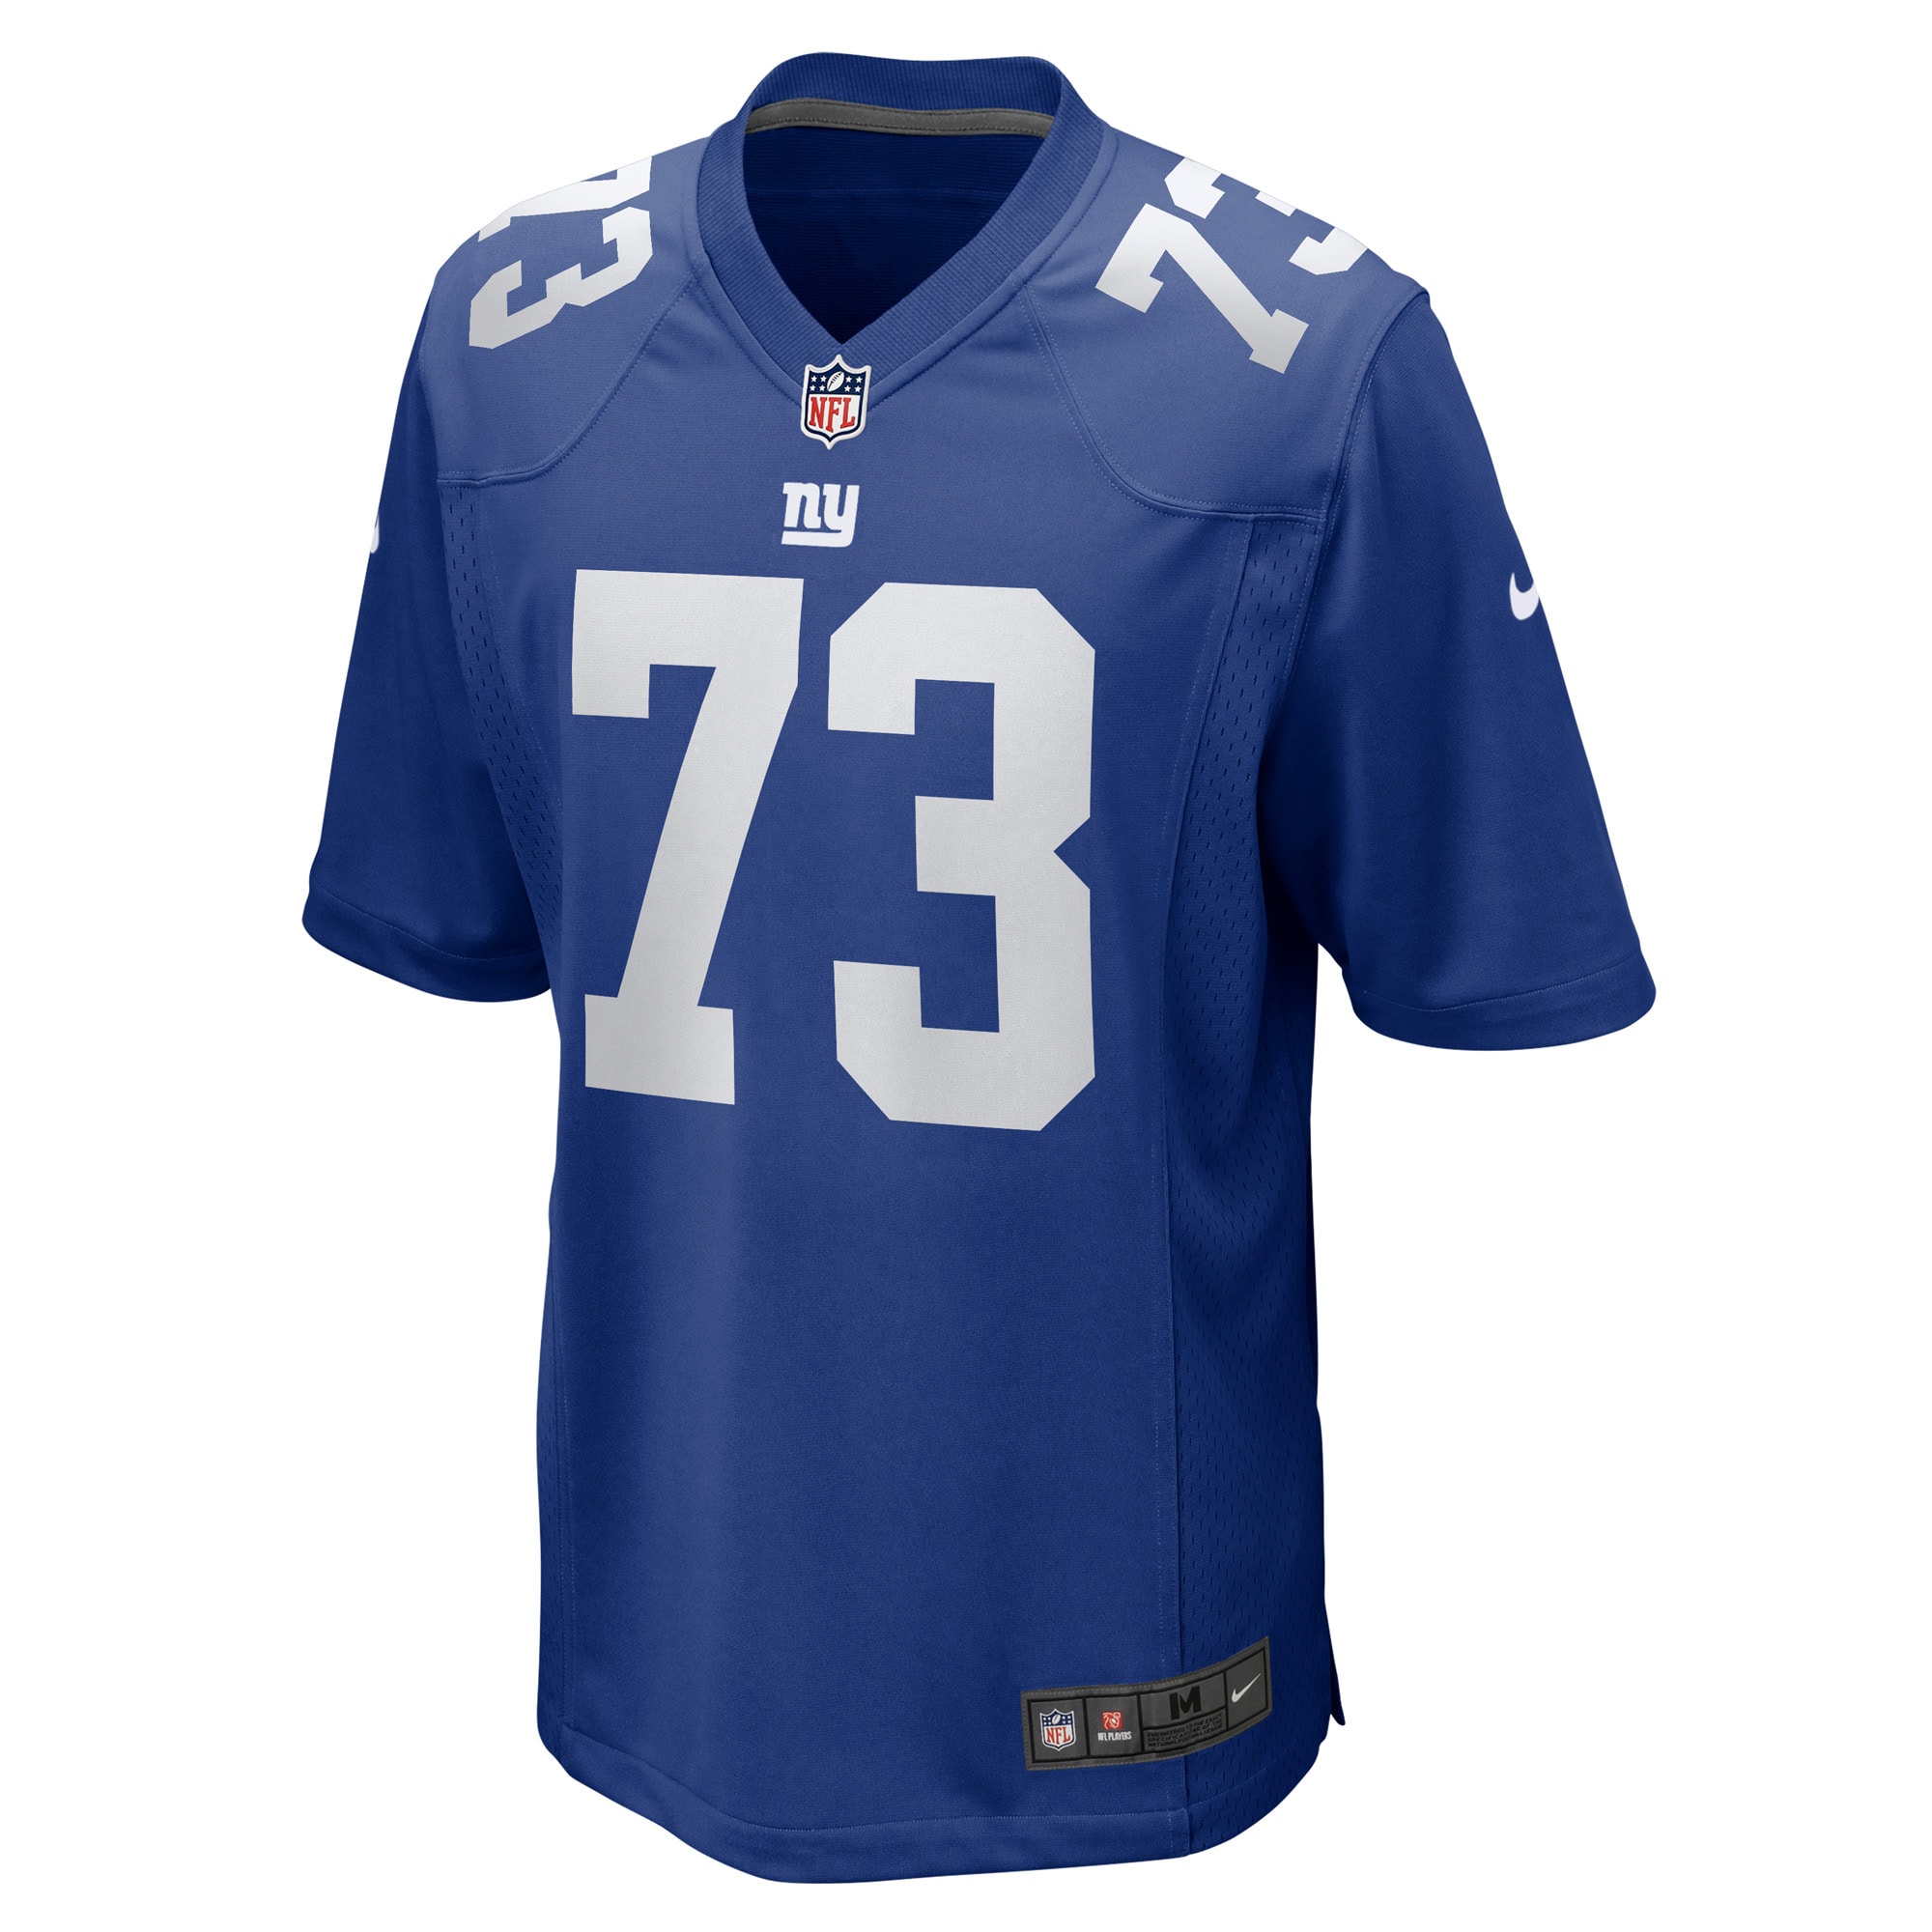 Men's New York Giants Jerseys Royal Evan Neal 2022 NFL Draft First Round Pick Player Game Style